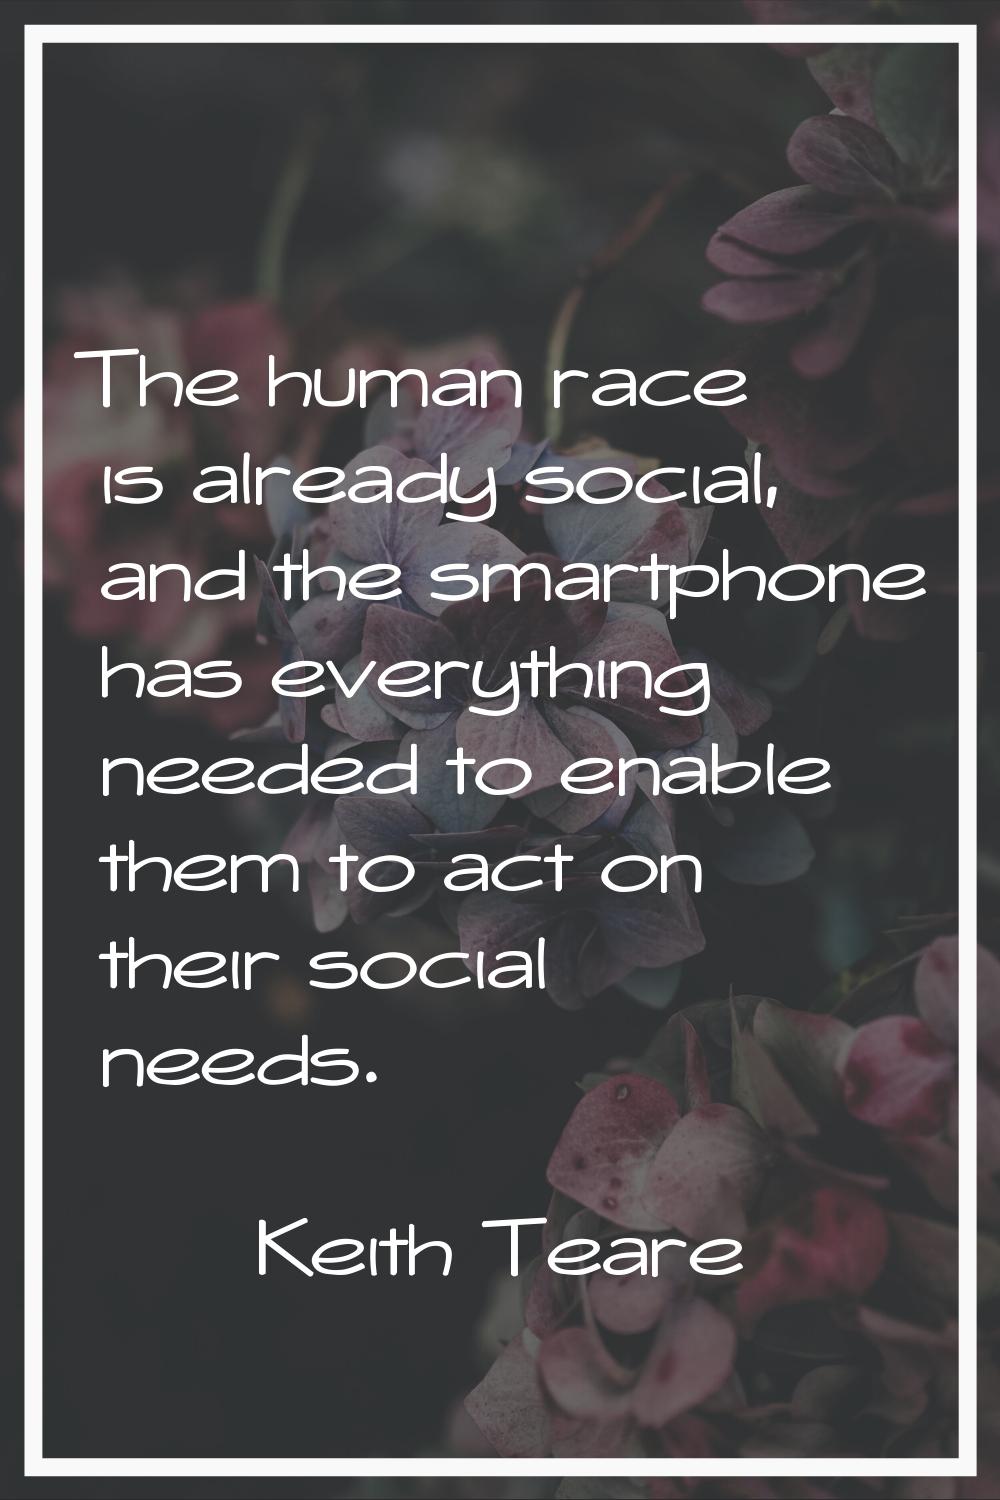 The human race is already social, and the smartphone has everything needed to enable them to act on